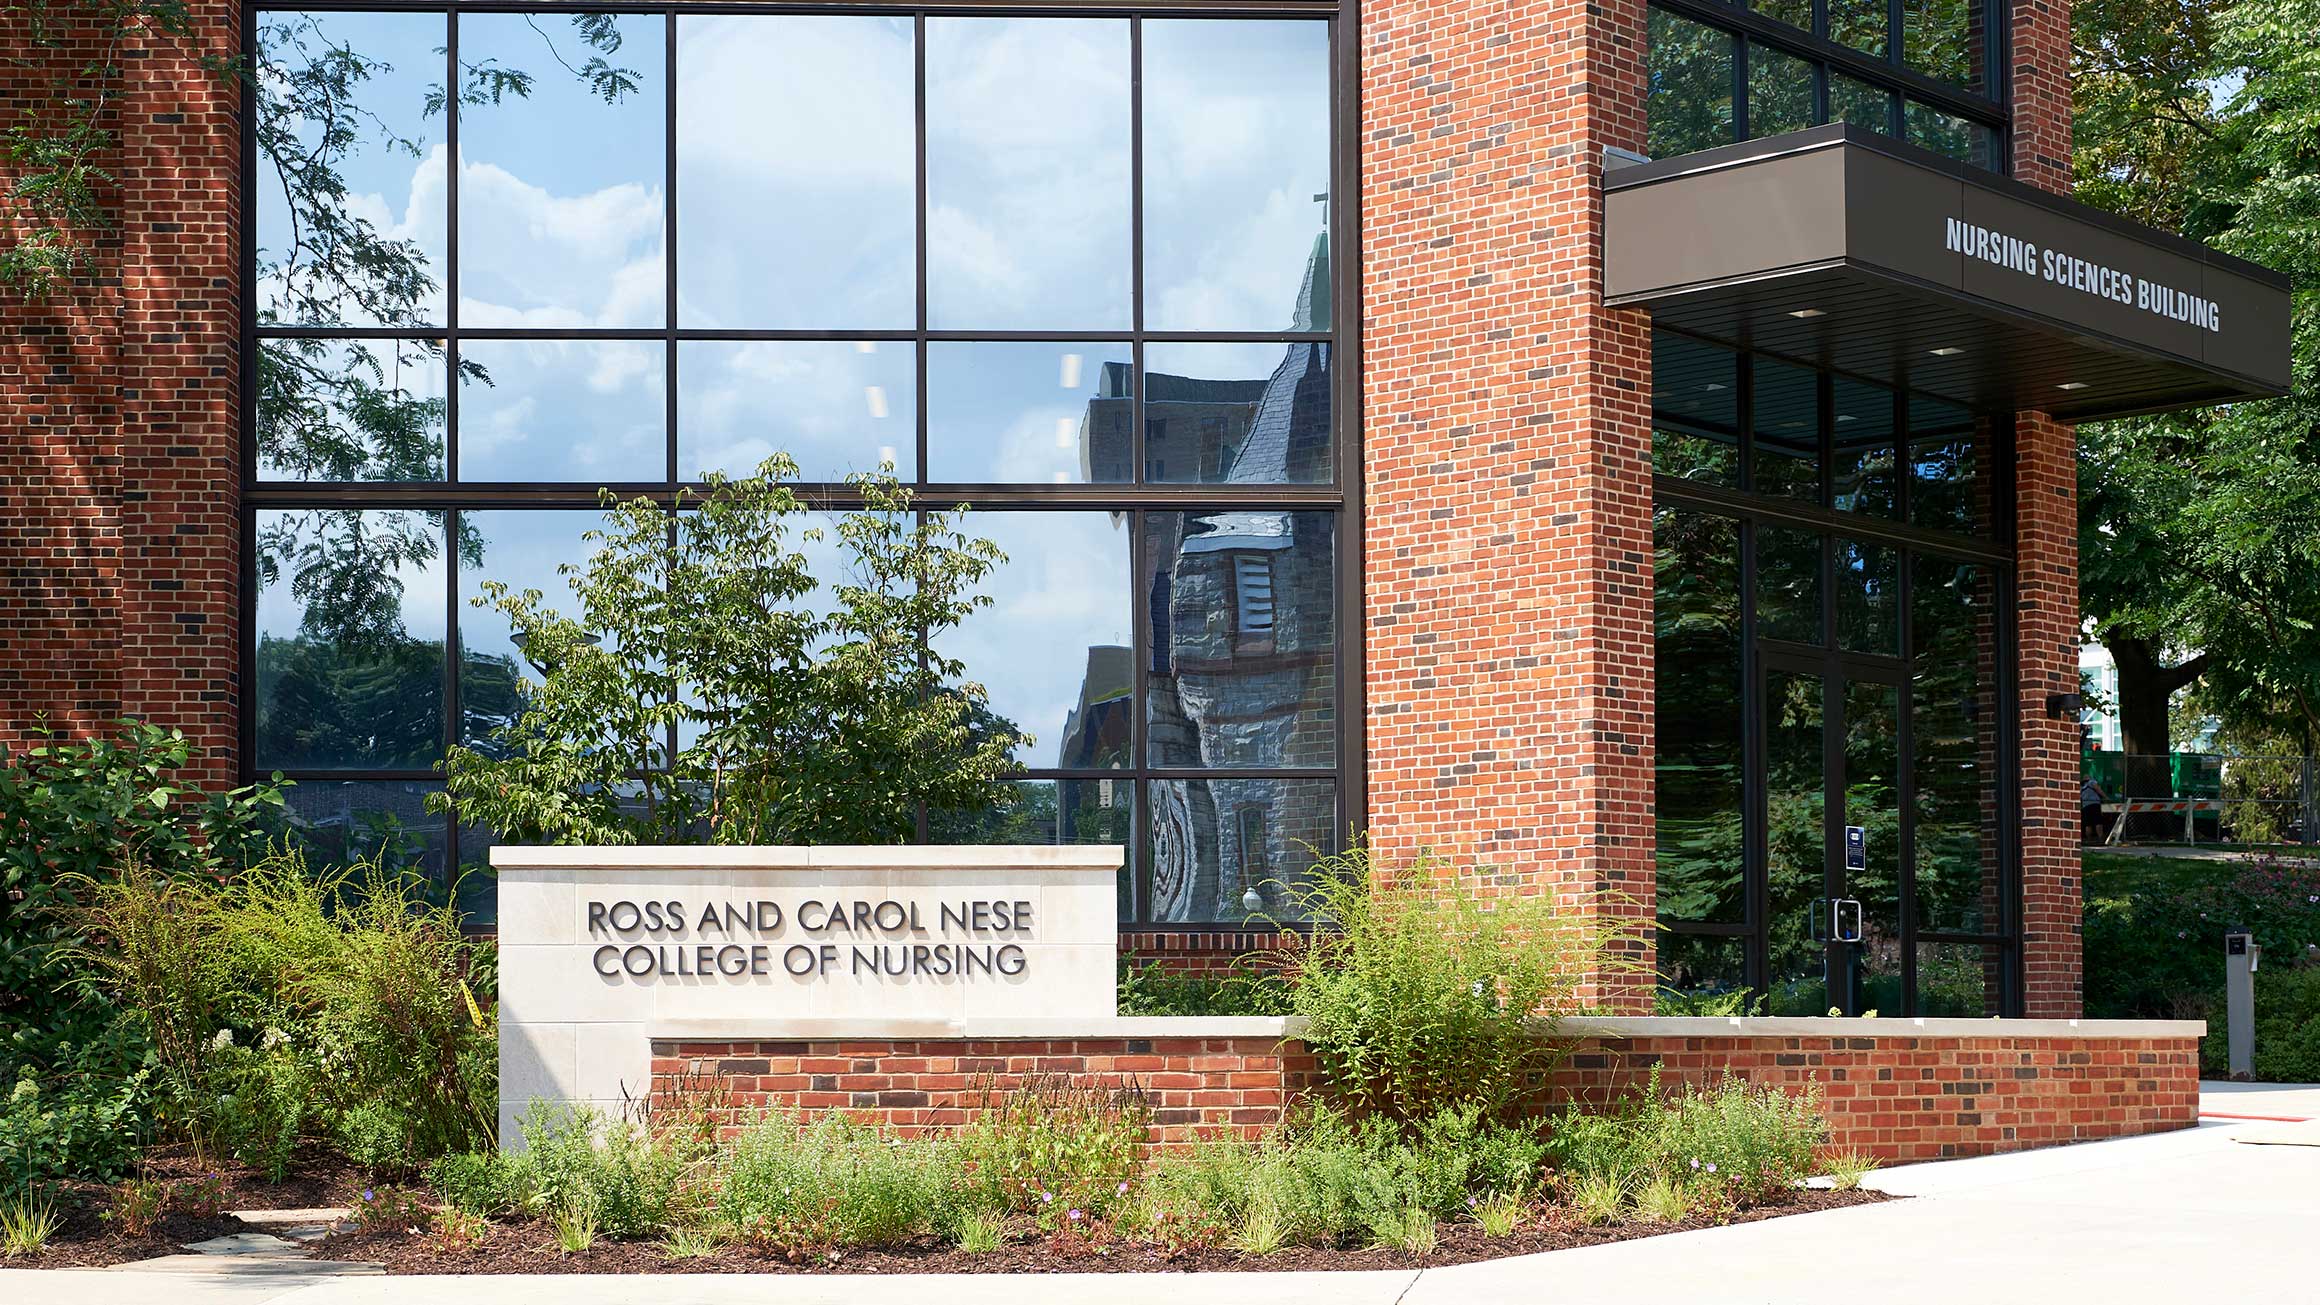 The Nursing Sciences Building is shown with a sign for the Ross and Carol Nese College of Nursing in front of it